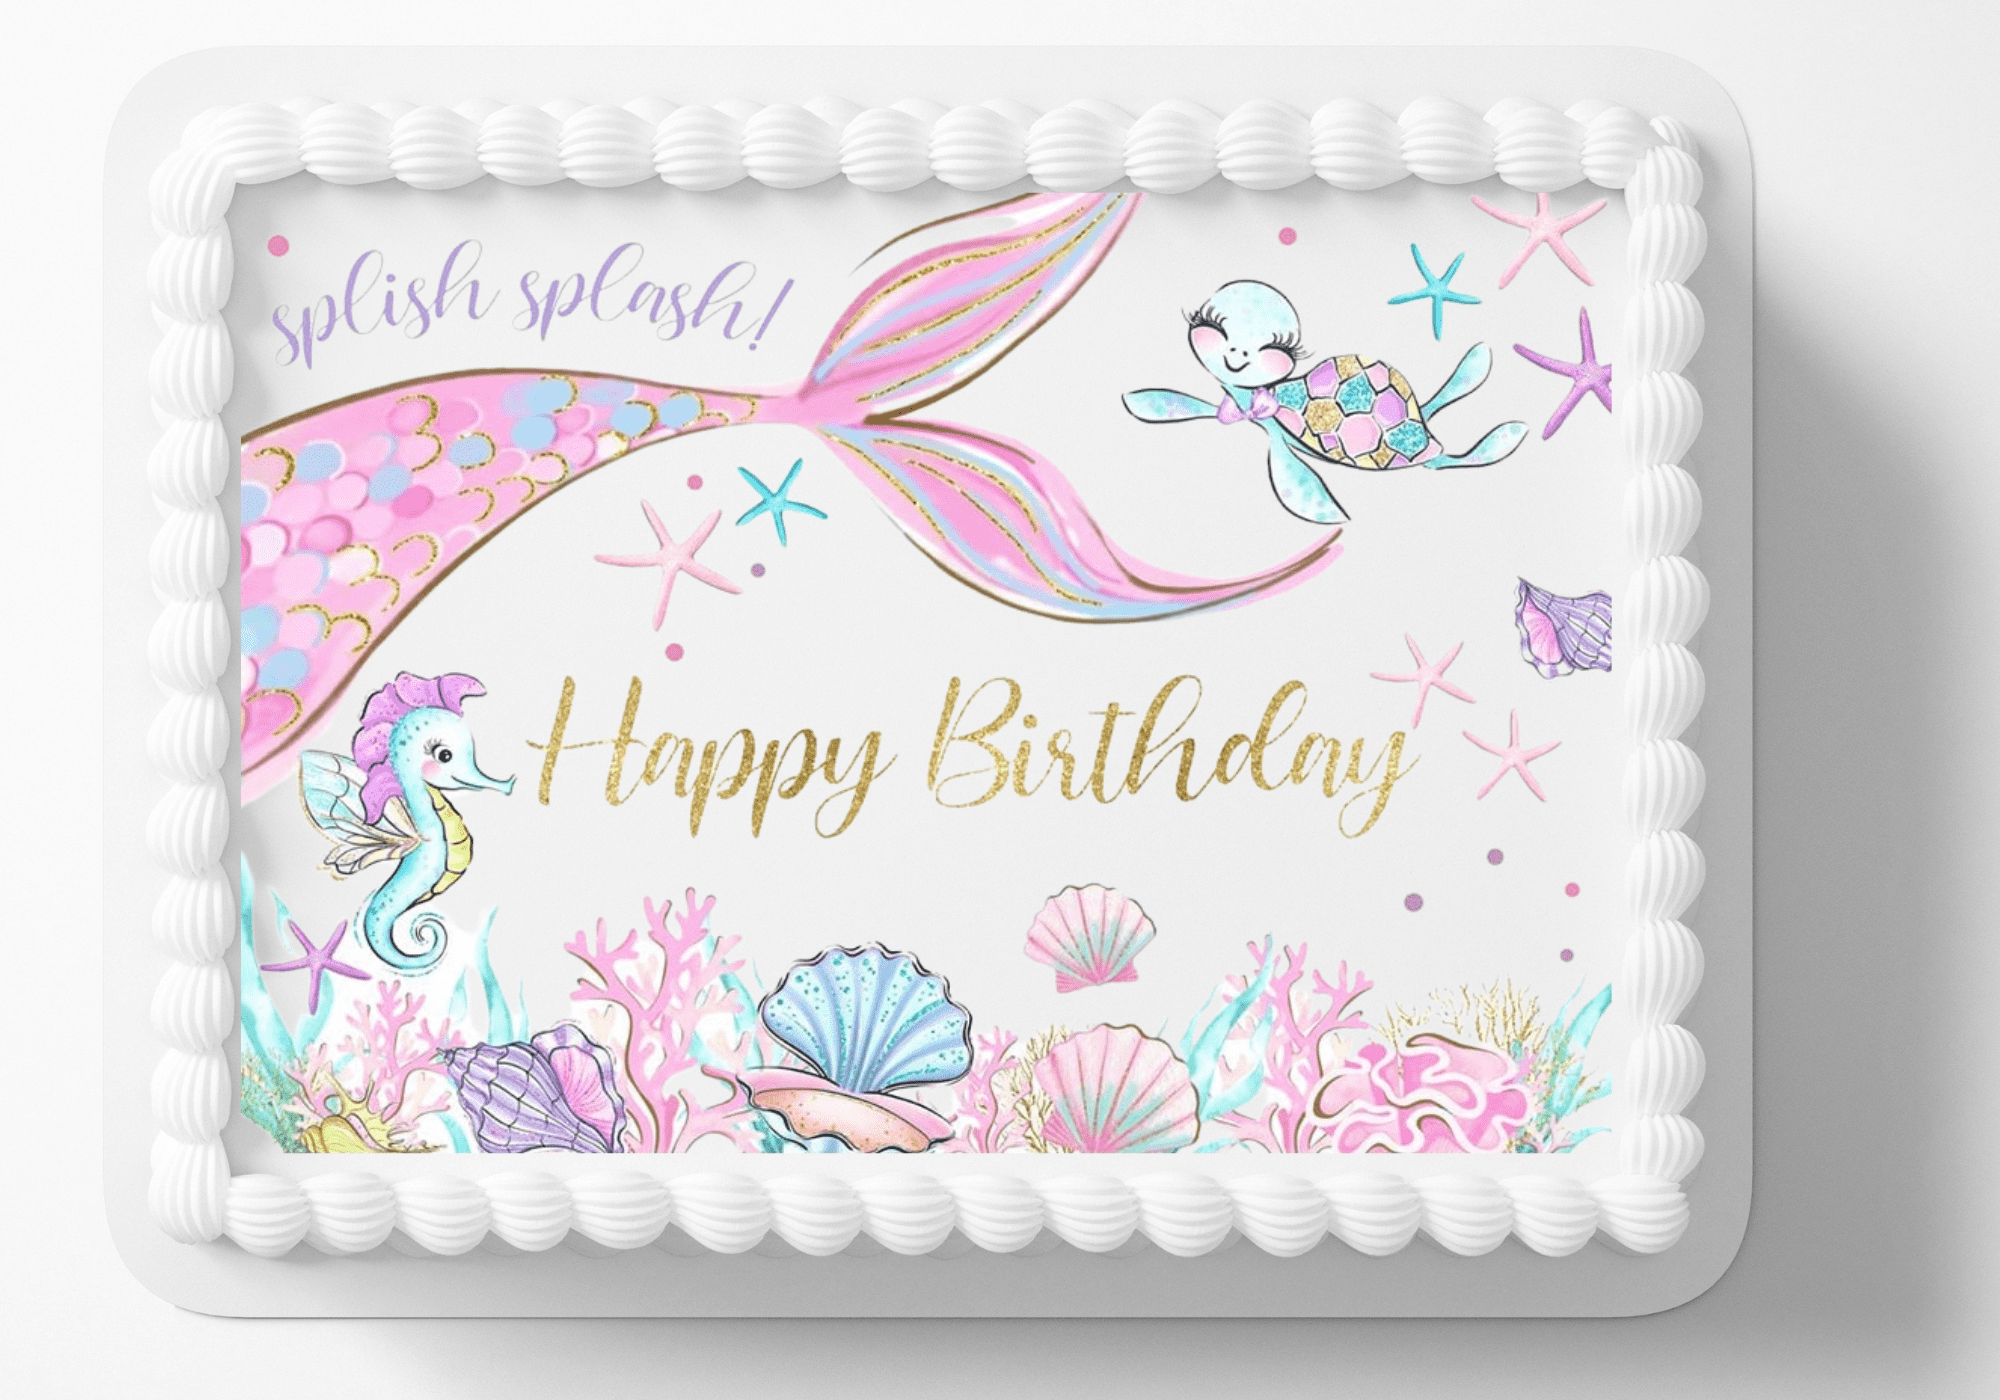 Shark Birthday Party - Cake, Decorations, and Games | Scratch and Stitch